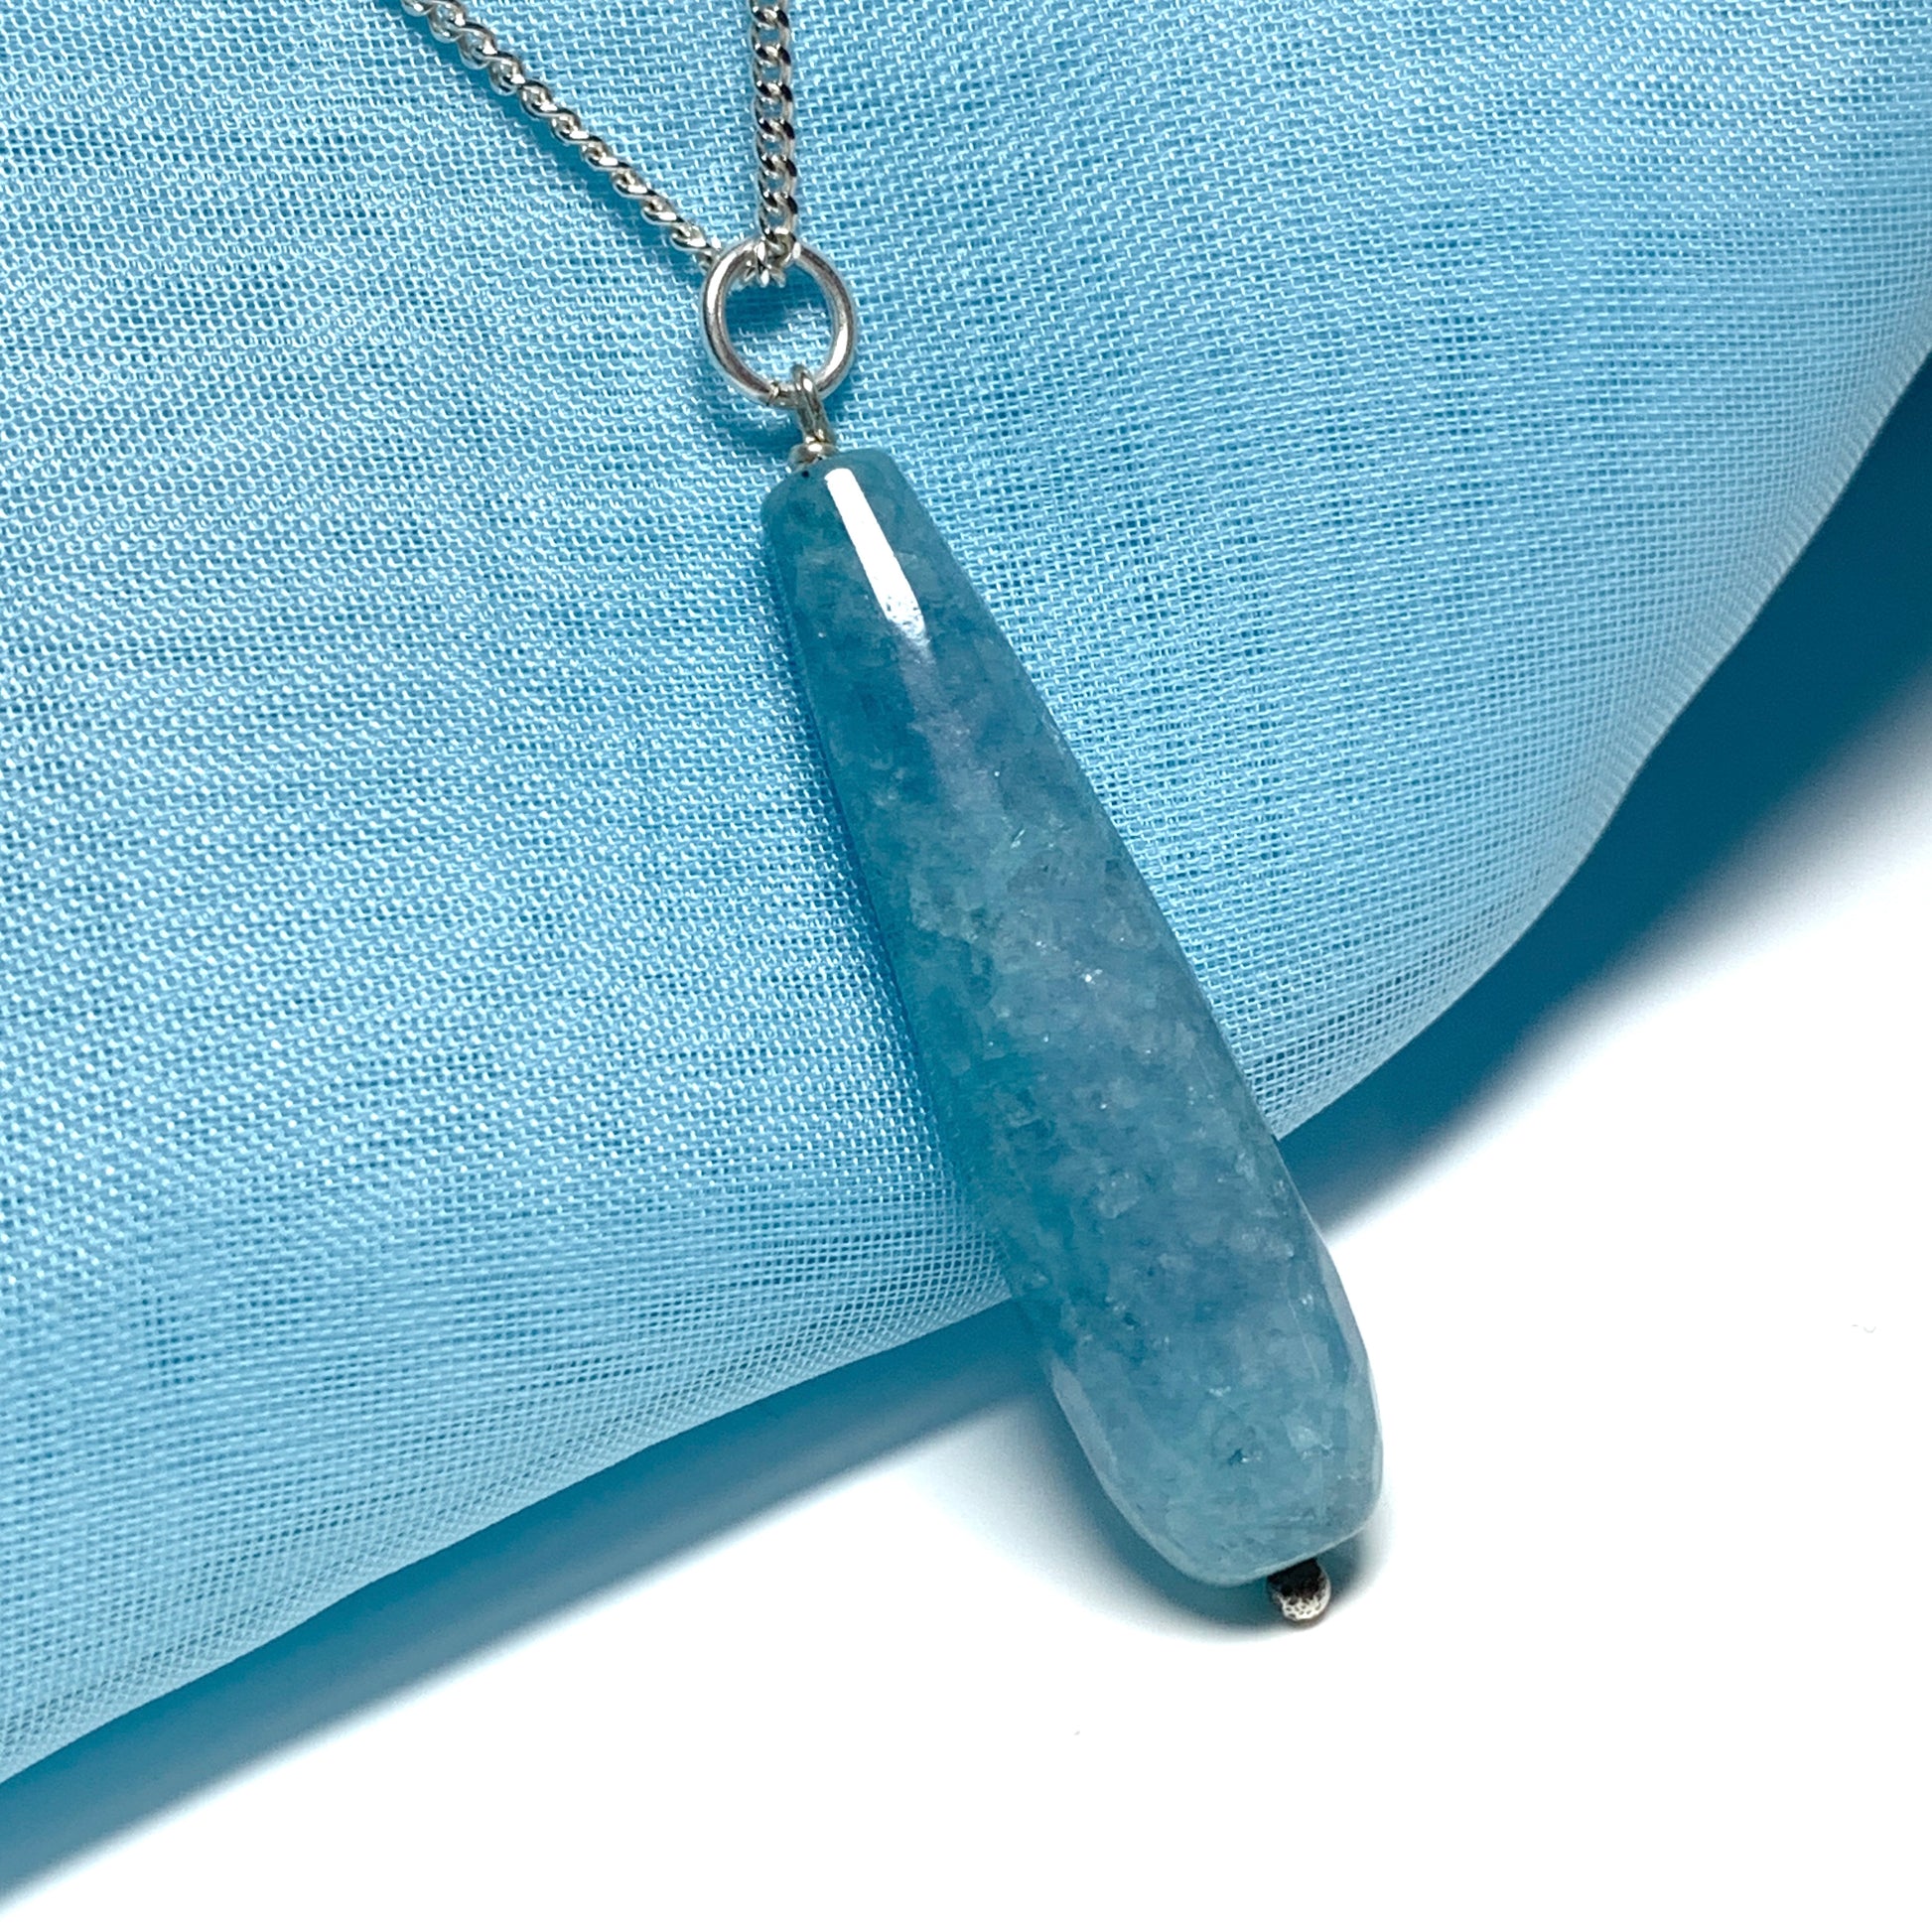 Light blue agate shaped teardrop necklace pendent sterling silver